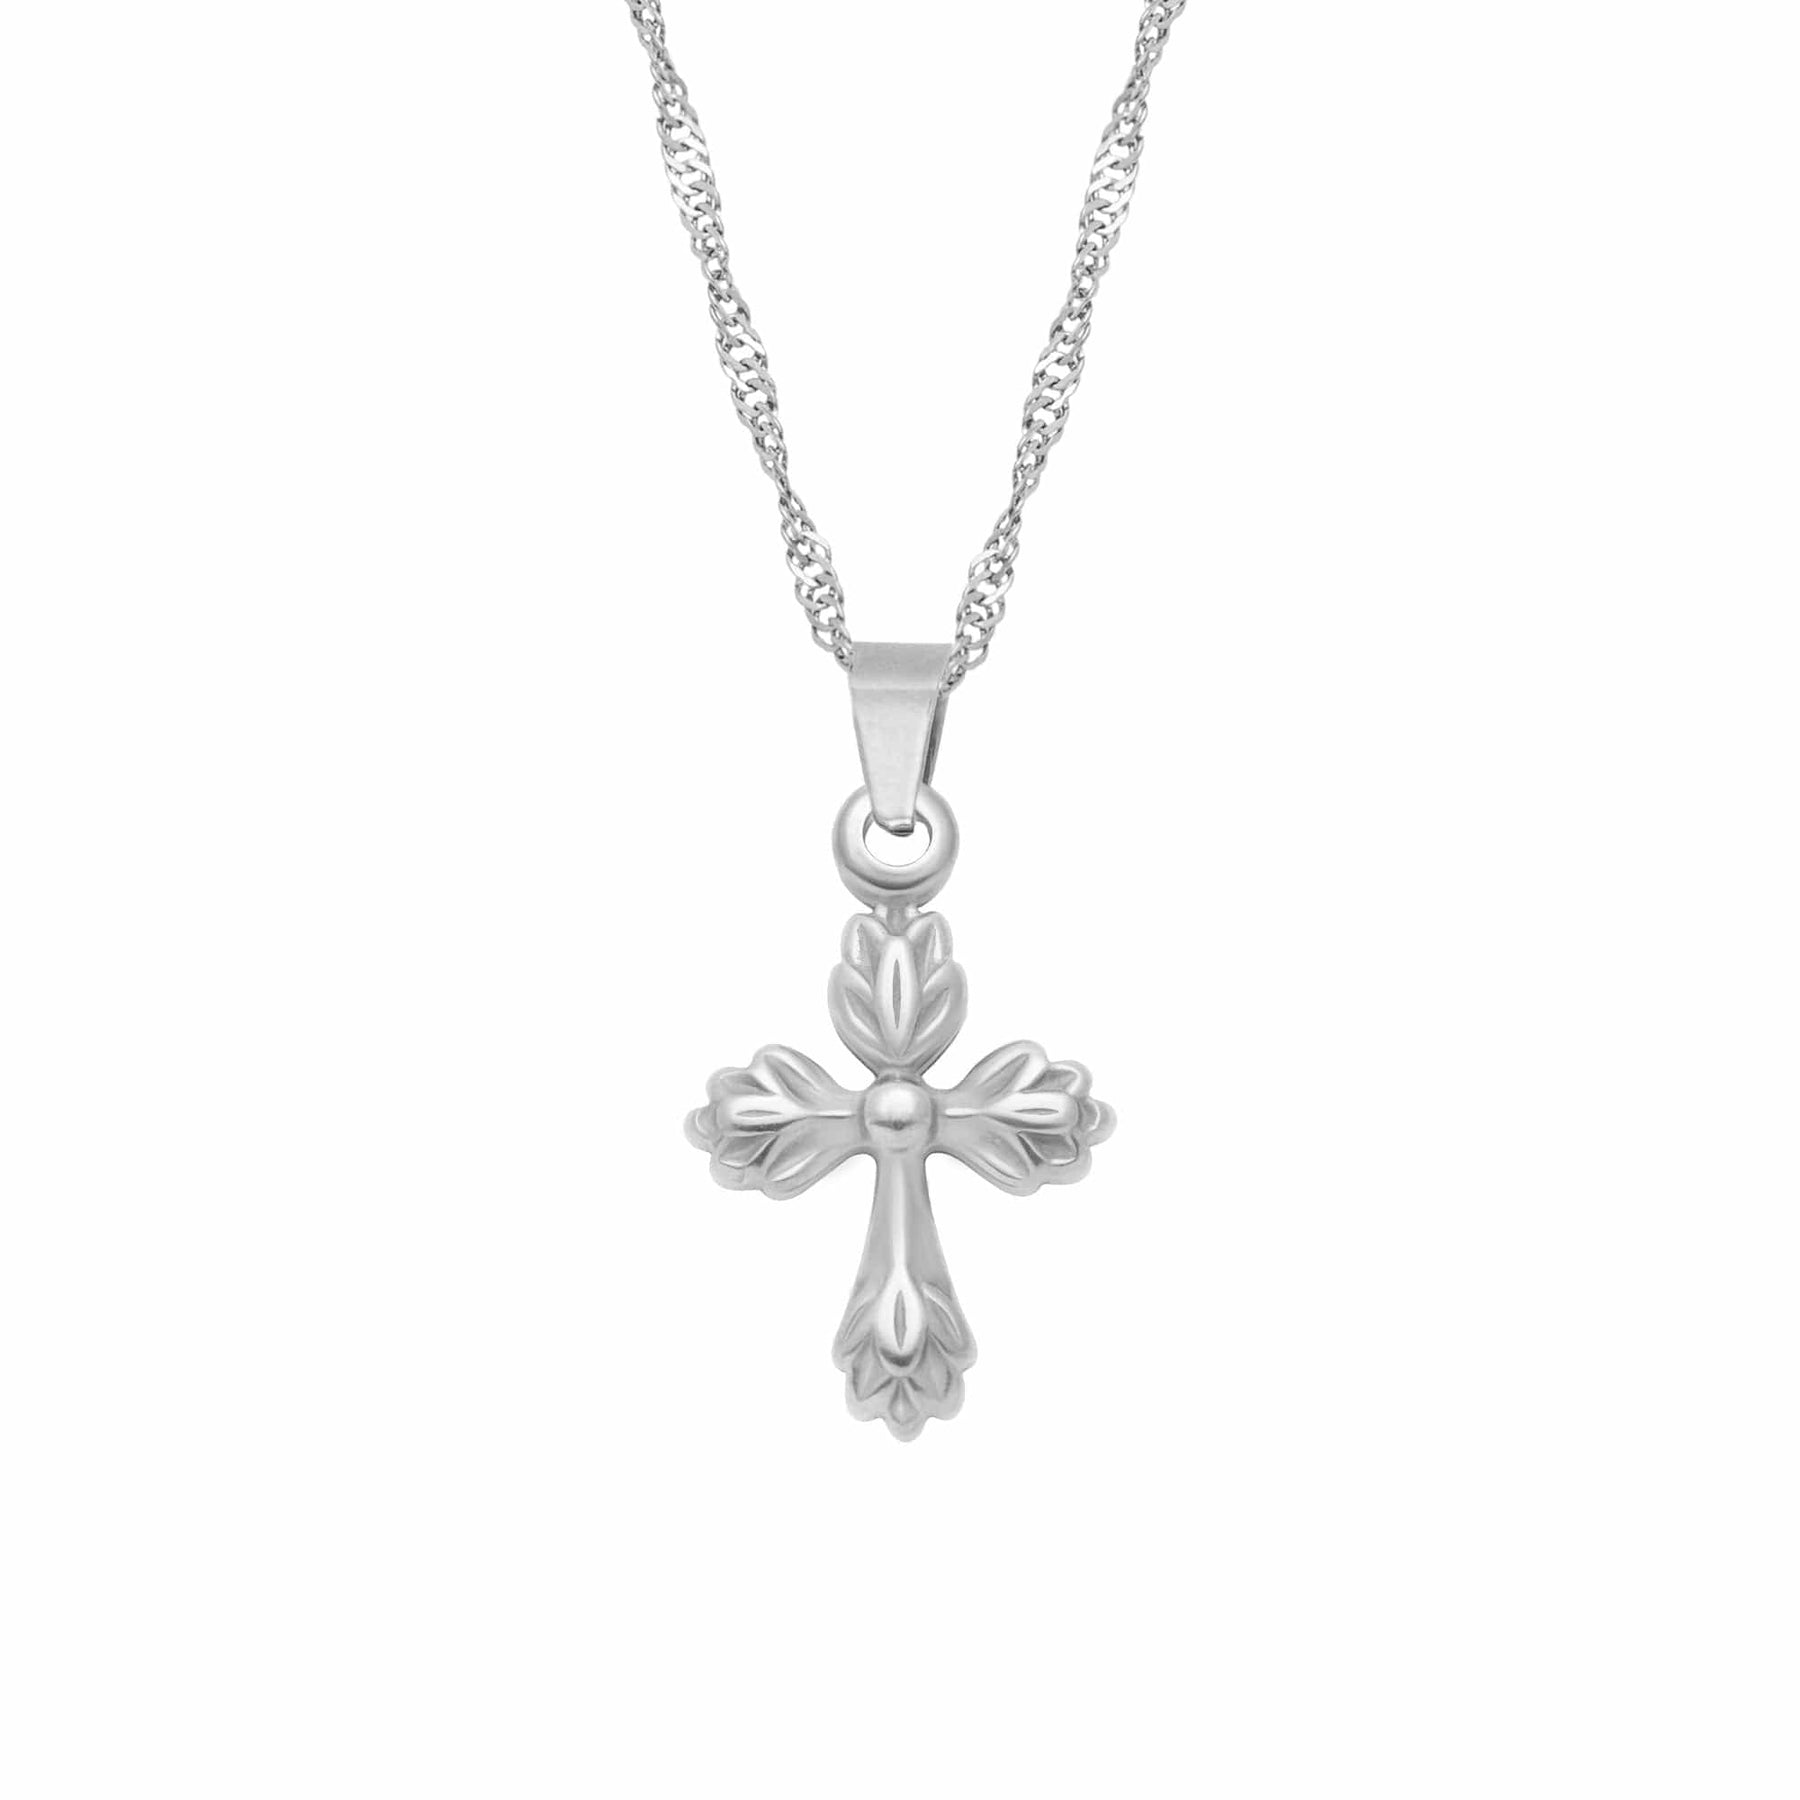 BohoMoon Stainless Steel Serenity Cross Necklace Silver